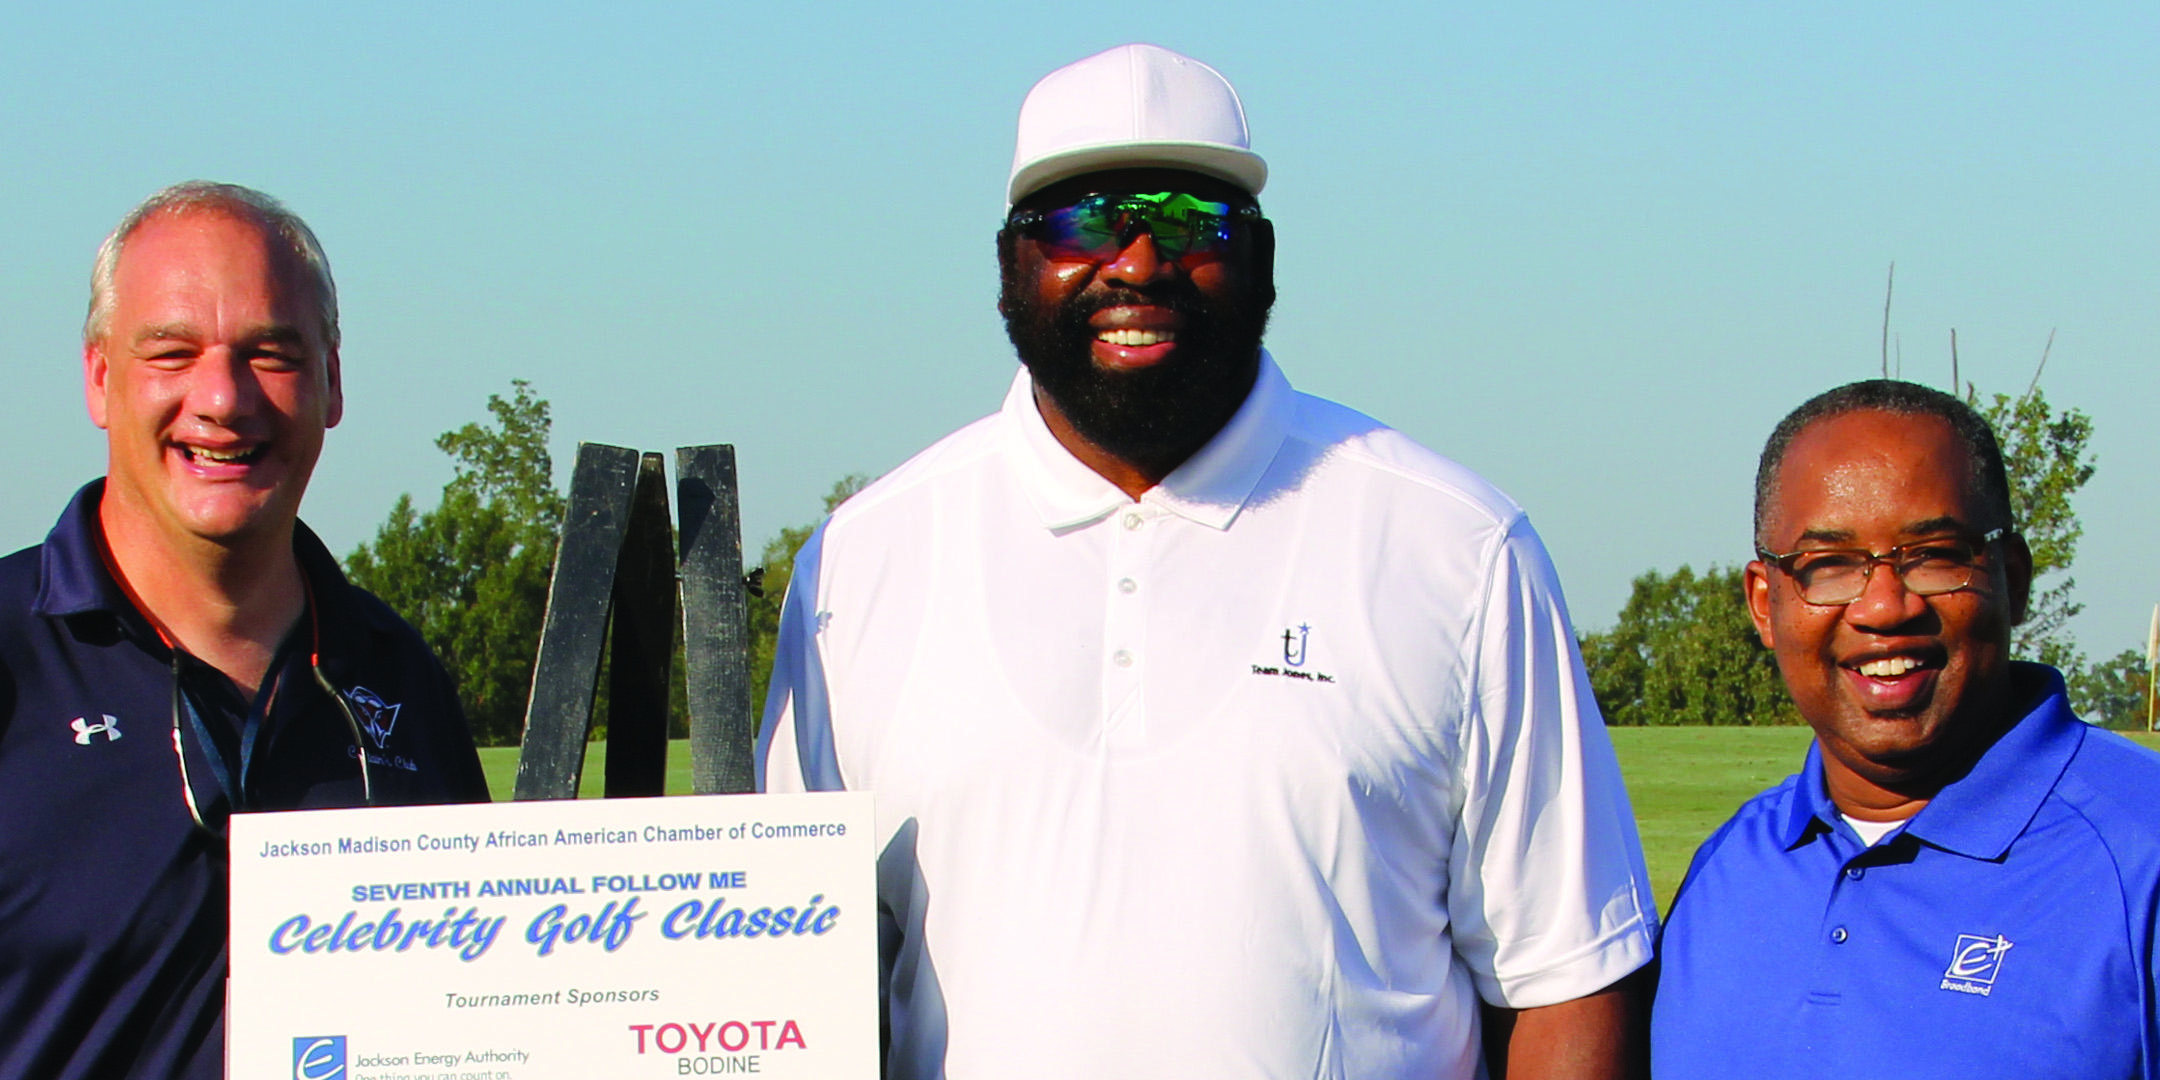 Follow Me Celebrity Golf Classic with Ed "Too Tall" Jones & Jerry Reese